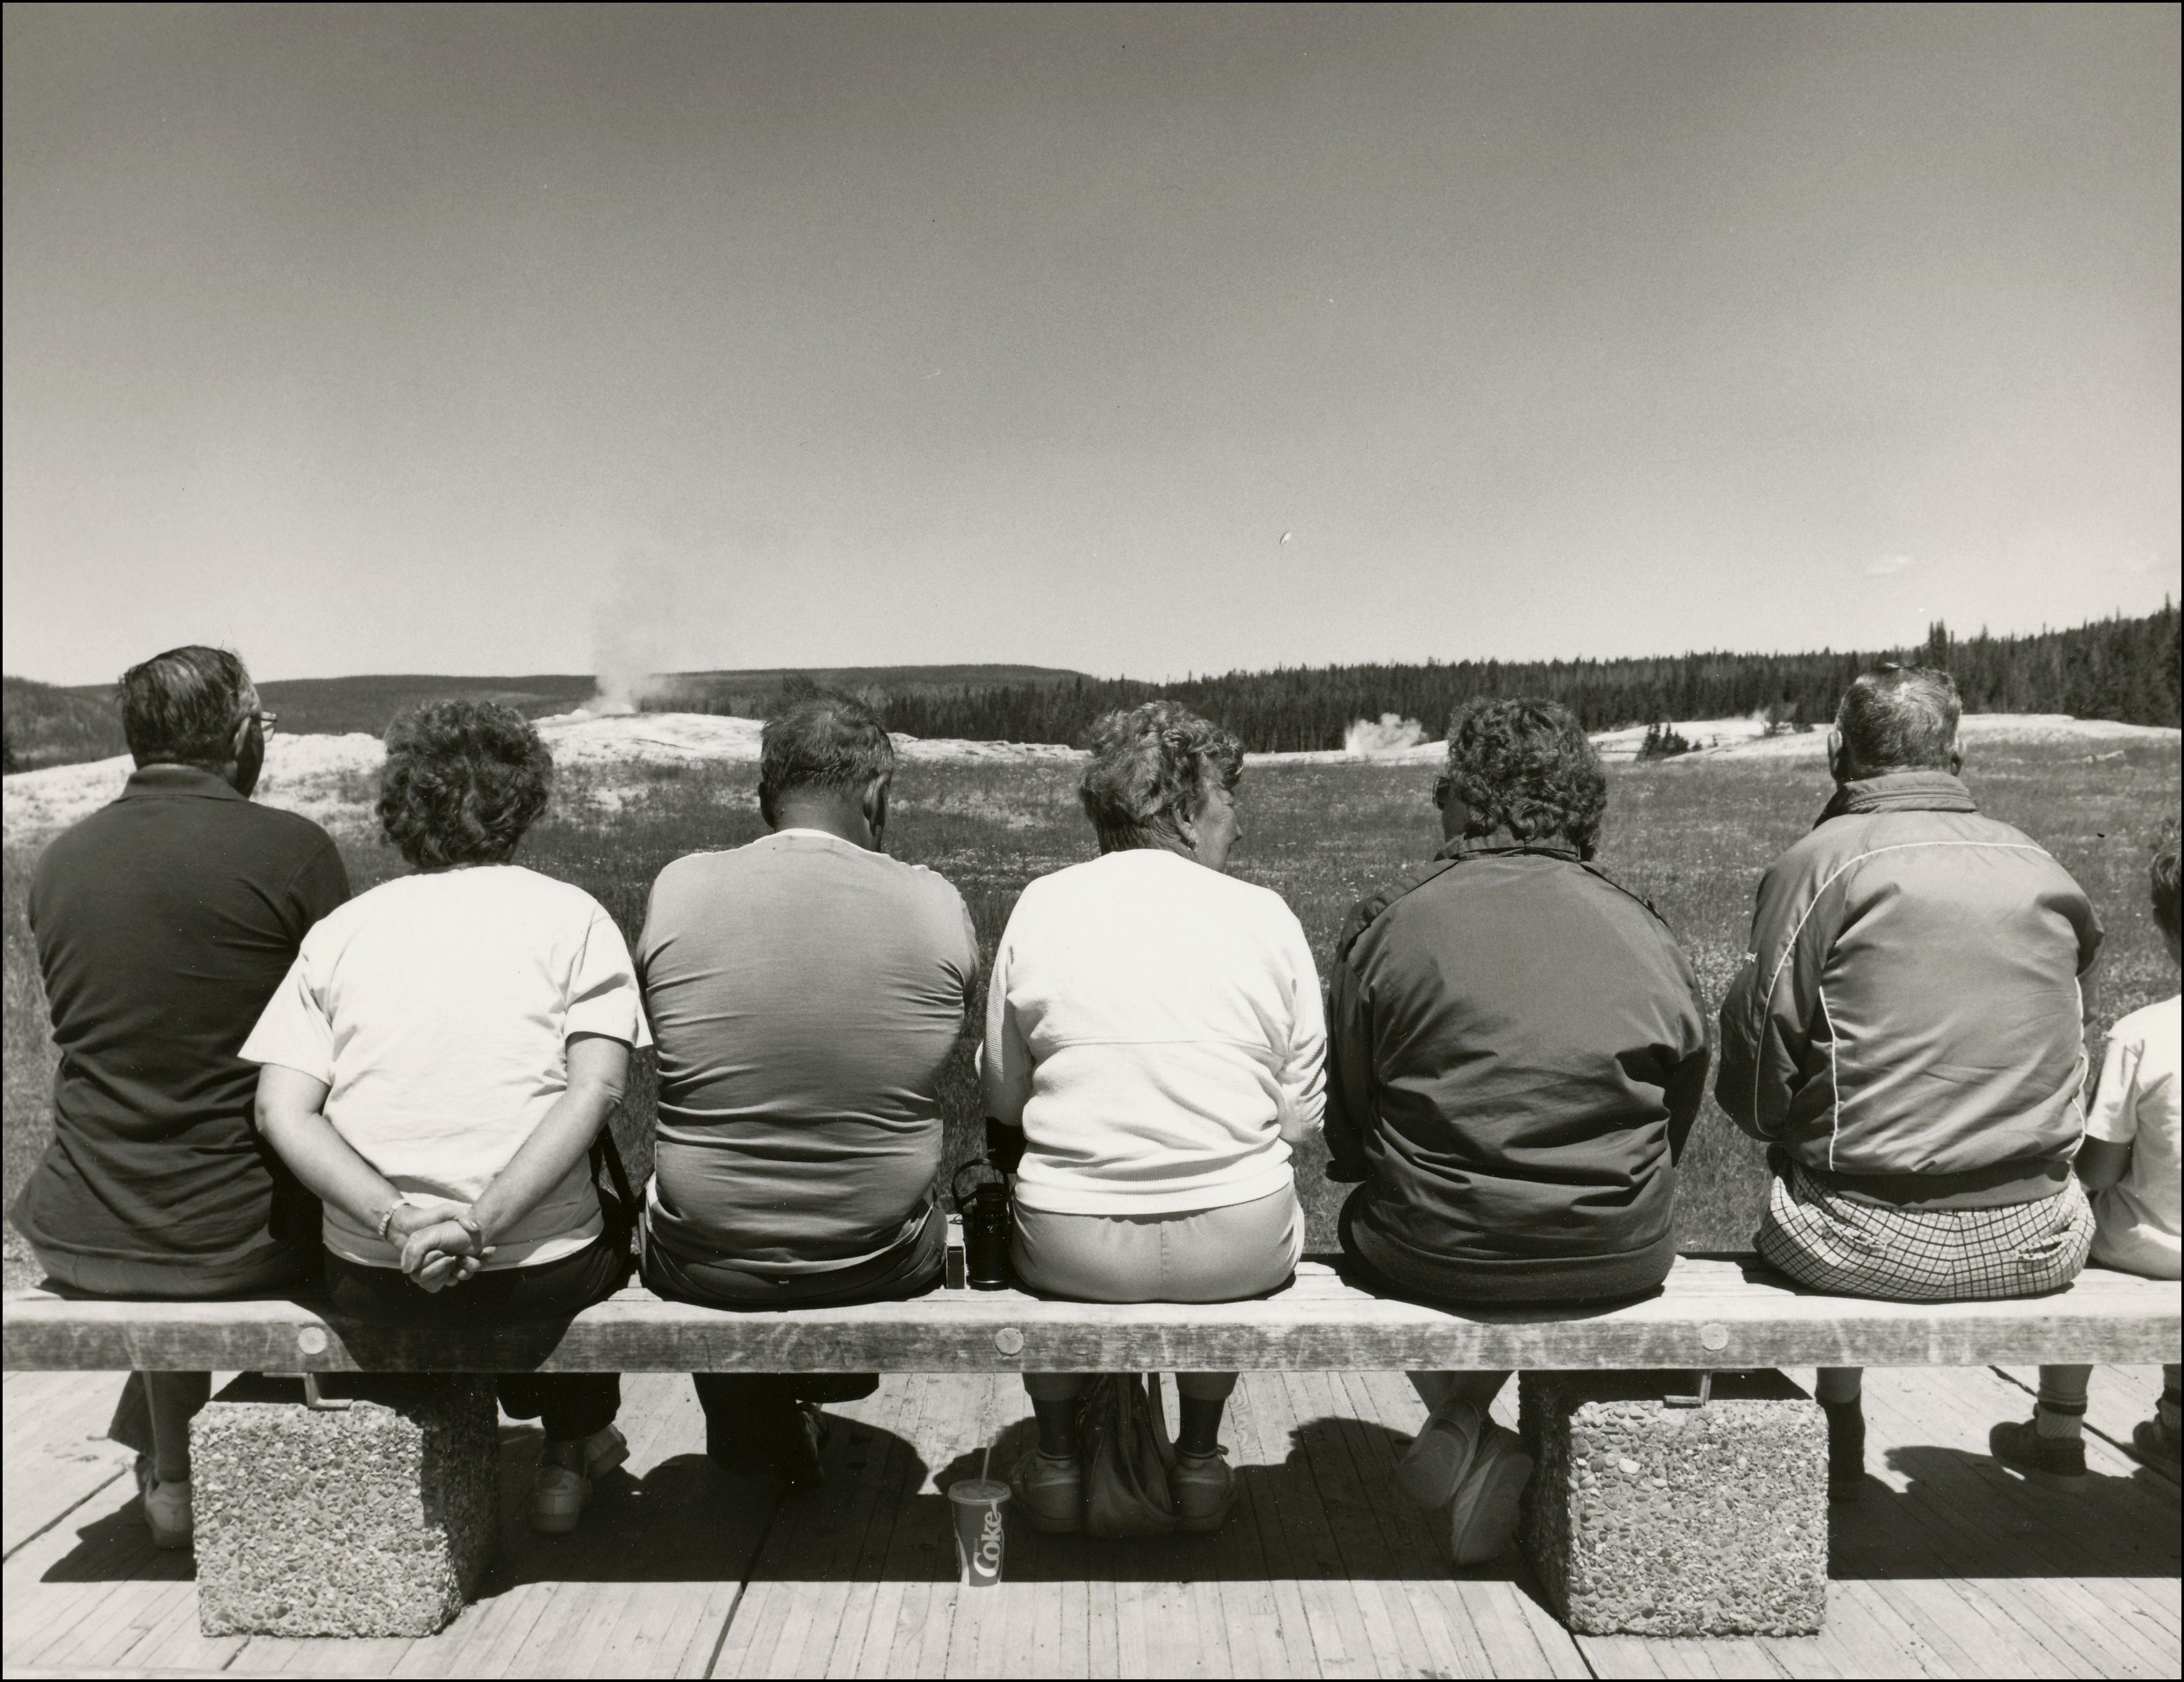 View of the backs of 6 people sitting on a bench watching steam from a geyser